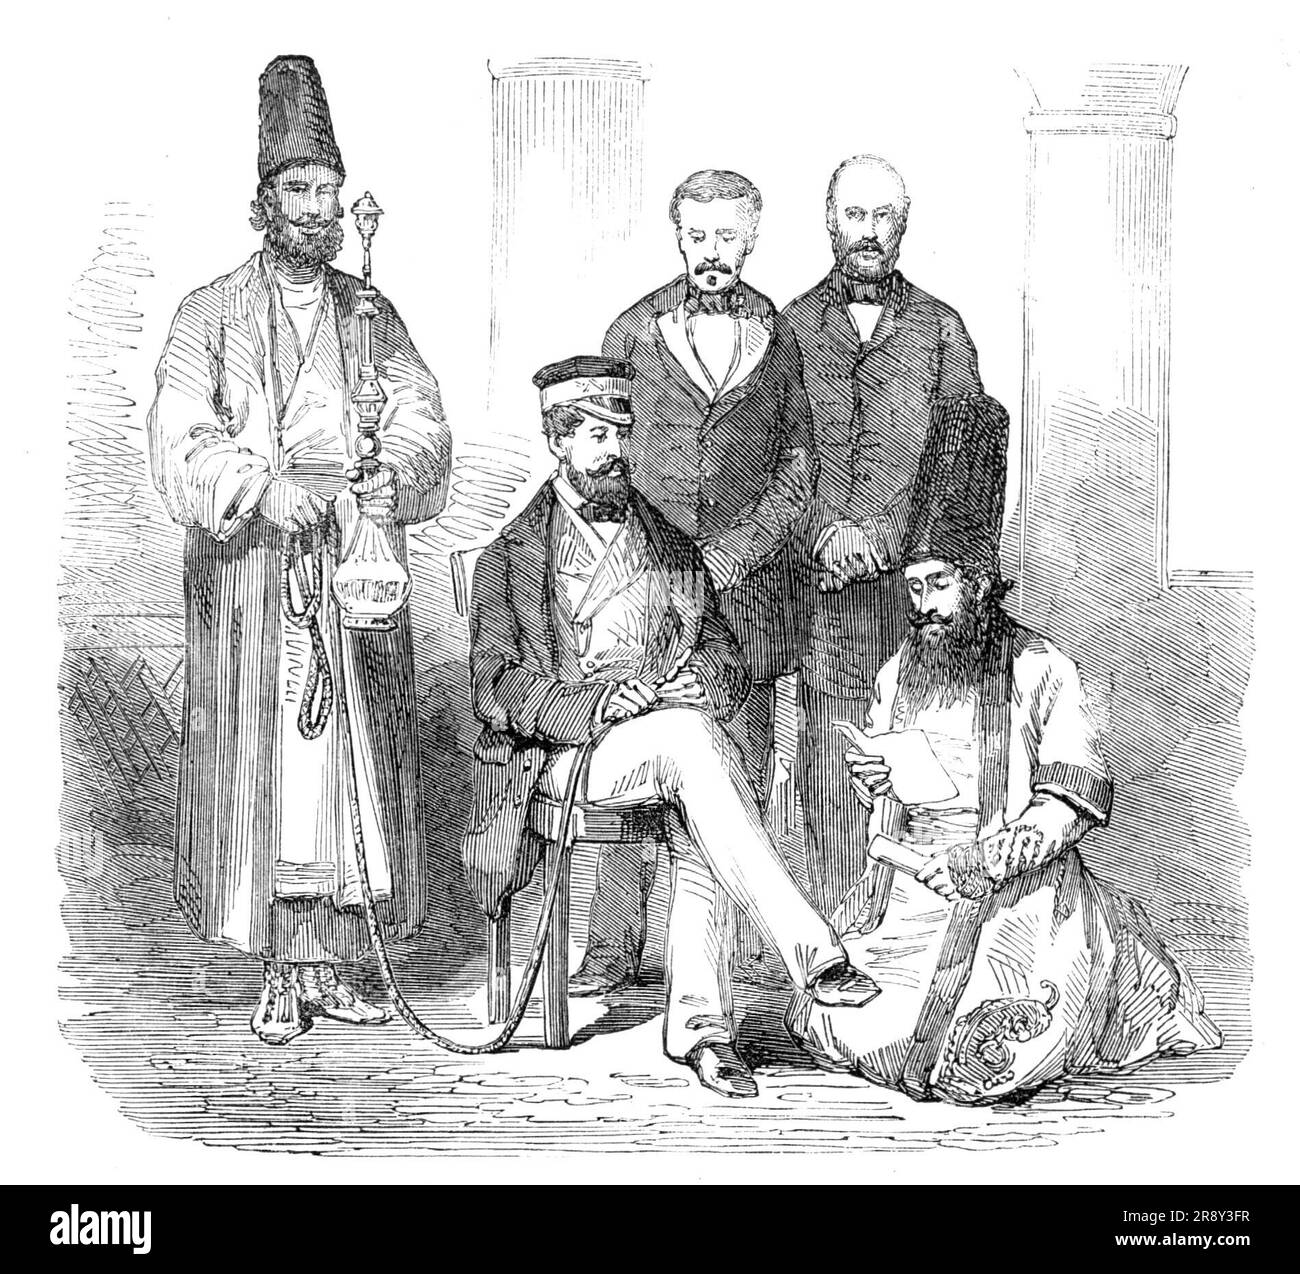 Sketches in the Persian Gulf - the Hon. Mr. Murray and his suite - from a photograph, 1857. Engraving after a photograph by 'Major H. Ban, Paymaster of the Field Force in the Persian Gulf...[of] official personages and officers of the expedition and inhabitants of Bushire [Bushehr]'. Charles Murray (seated holding mouthpiece of huqqa pipe) was Envoy Extraordinary and Minister Plenipotentiary to the Shah of Persia. From &quot;Illustrated London News&quot;, 1857. Stock Photo